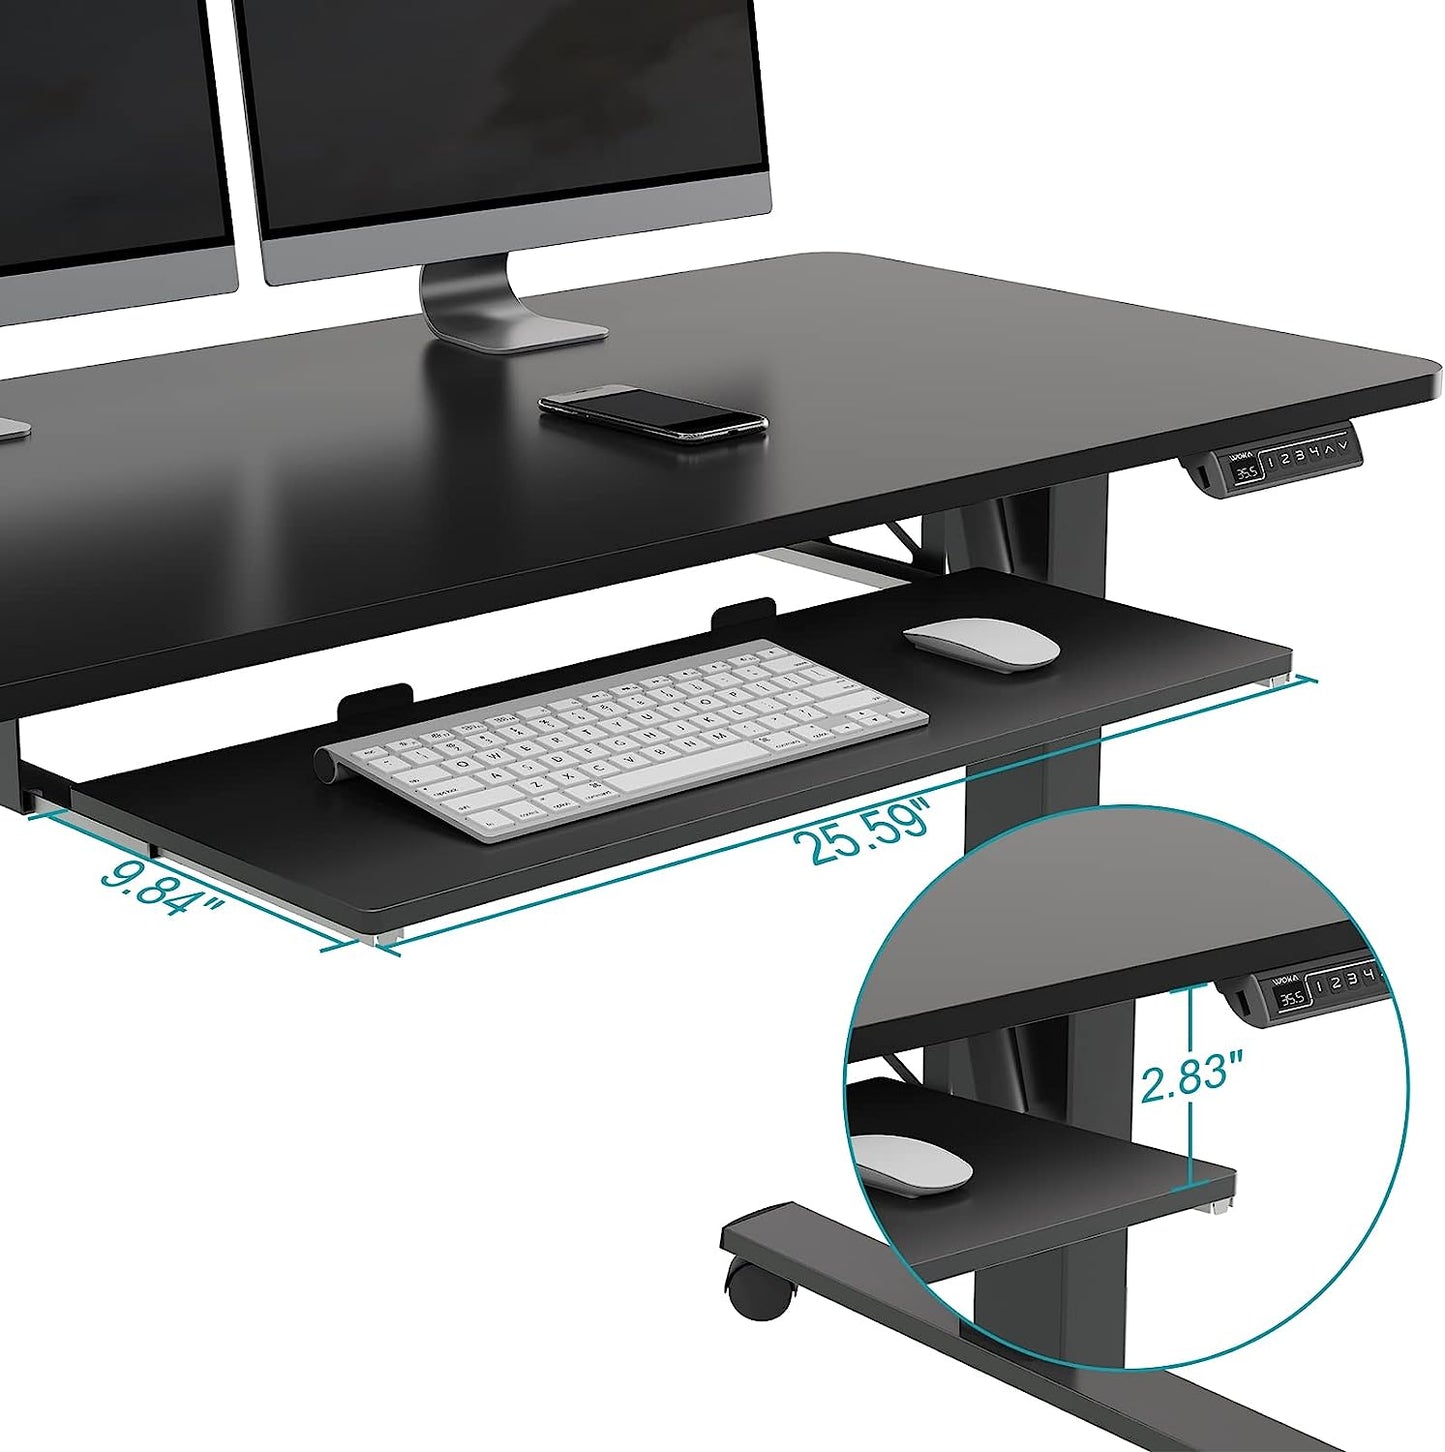 WOKA Electric Standing Desk with Keyboard Tray, 55" x 24" Stand Up Desk, Height Adjustable Sit Stand Desk with Memory Controller for Home Office, Motorized Desk with Splice Board, Black